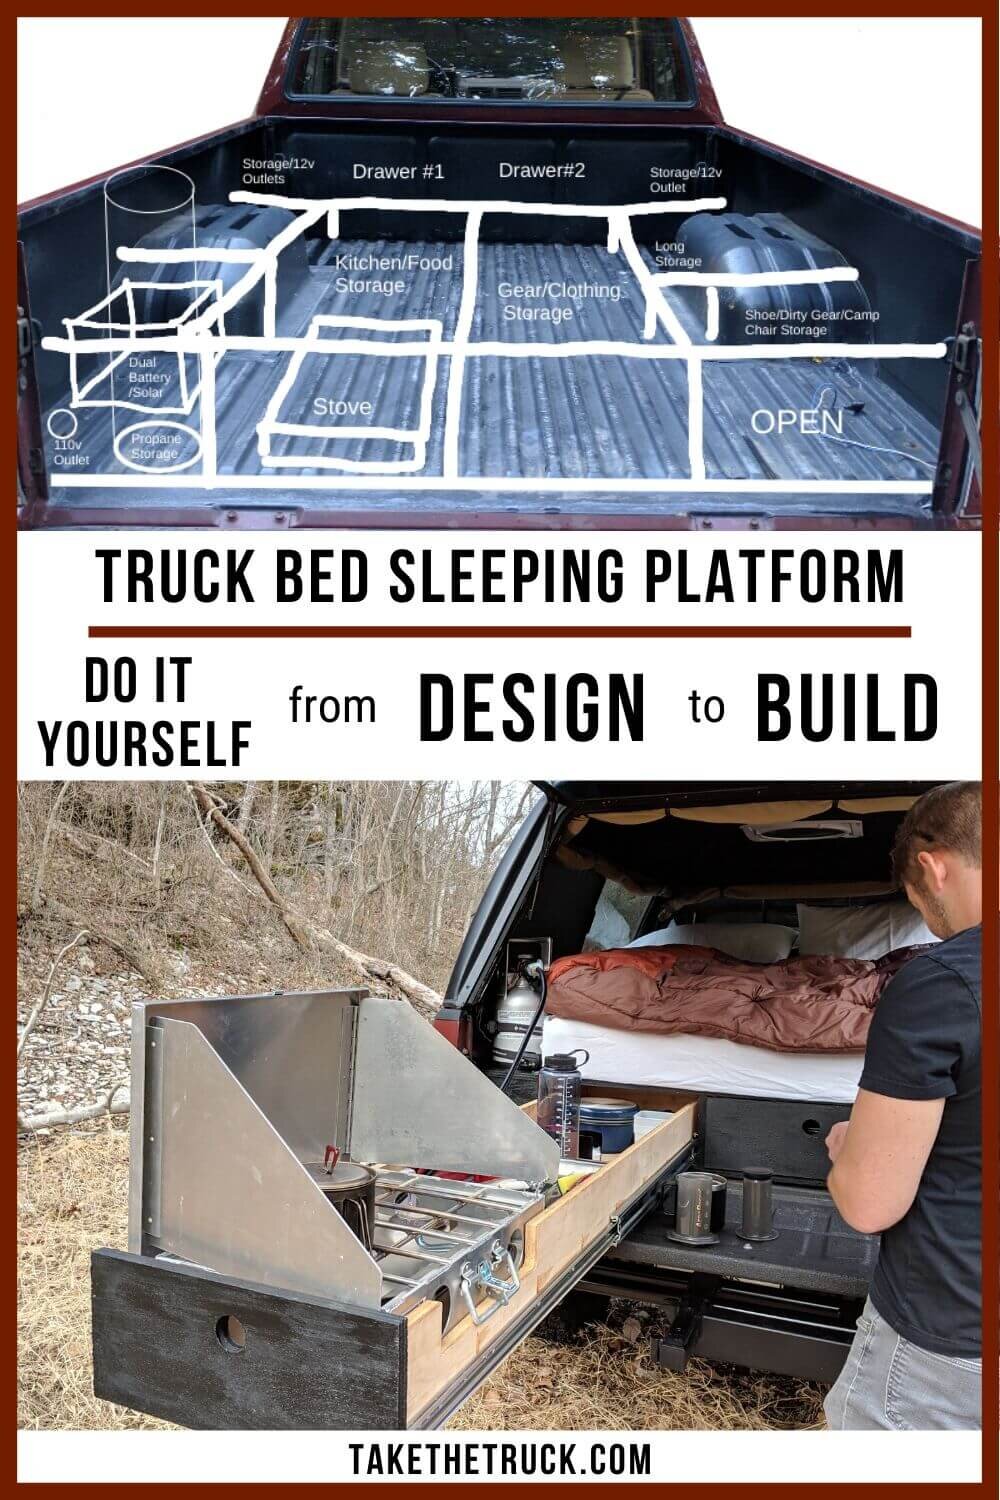 Detailed DIY truck camper plans and diagrams to build an awesome truck bed camping platform for sleeping with truck bed drawers for storage. Truck camping platform build made easy!